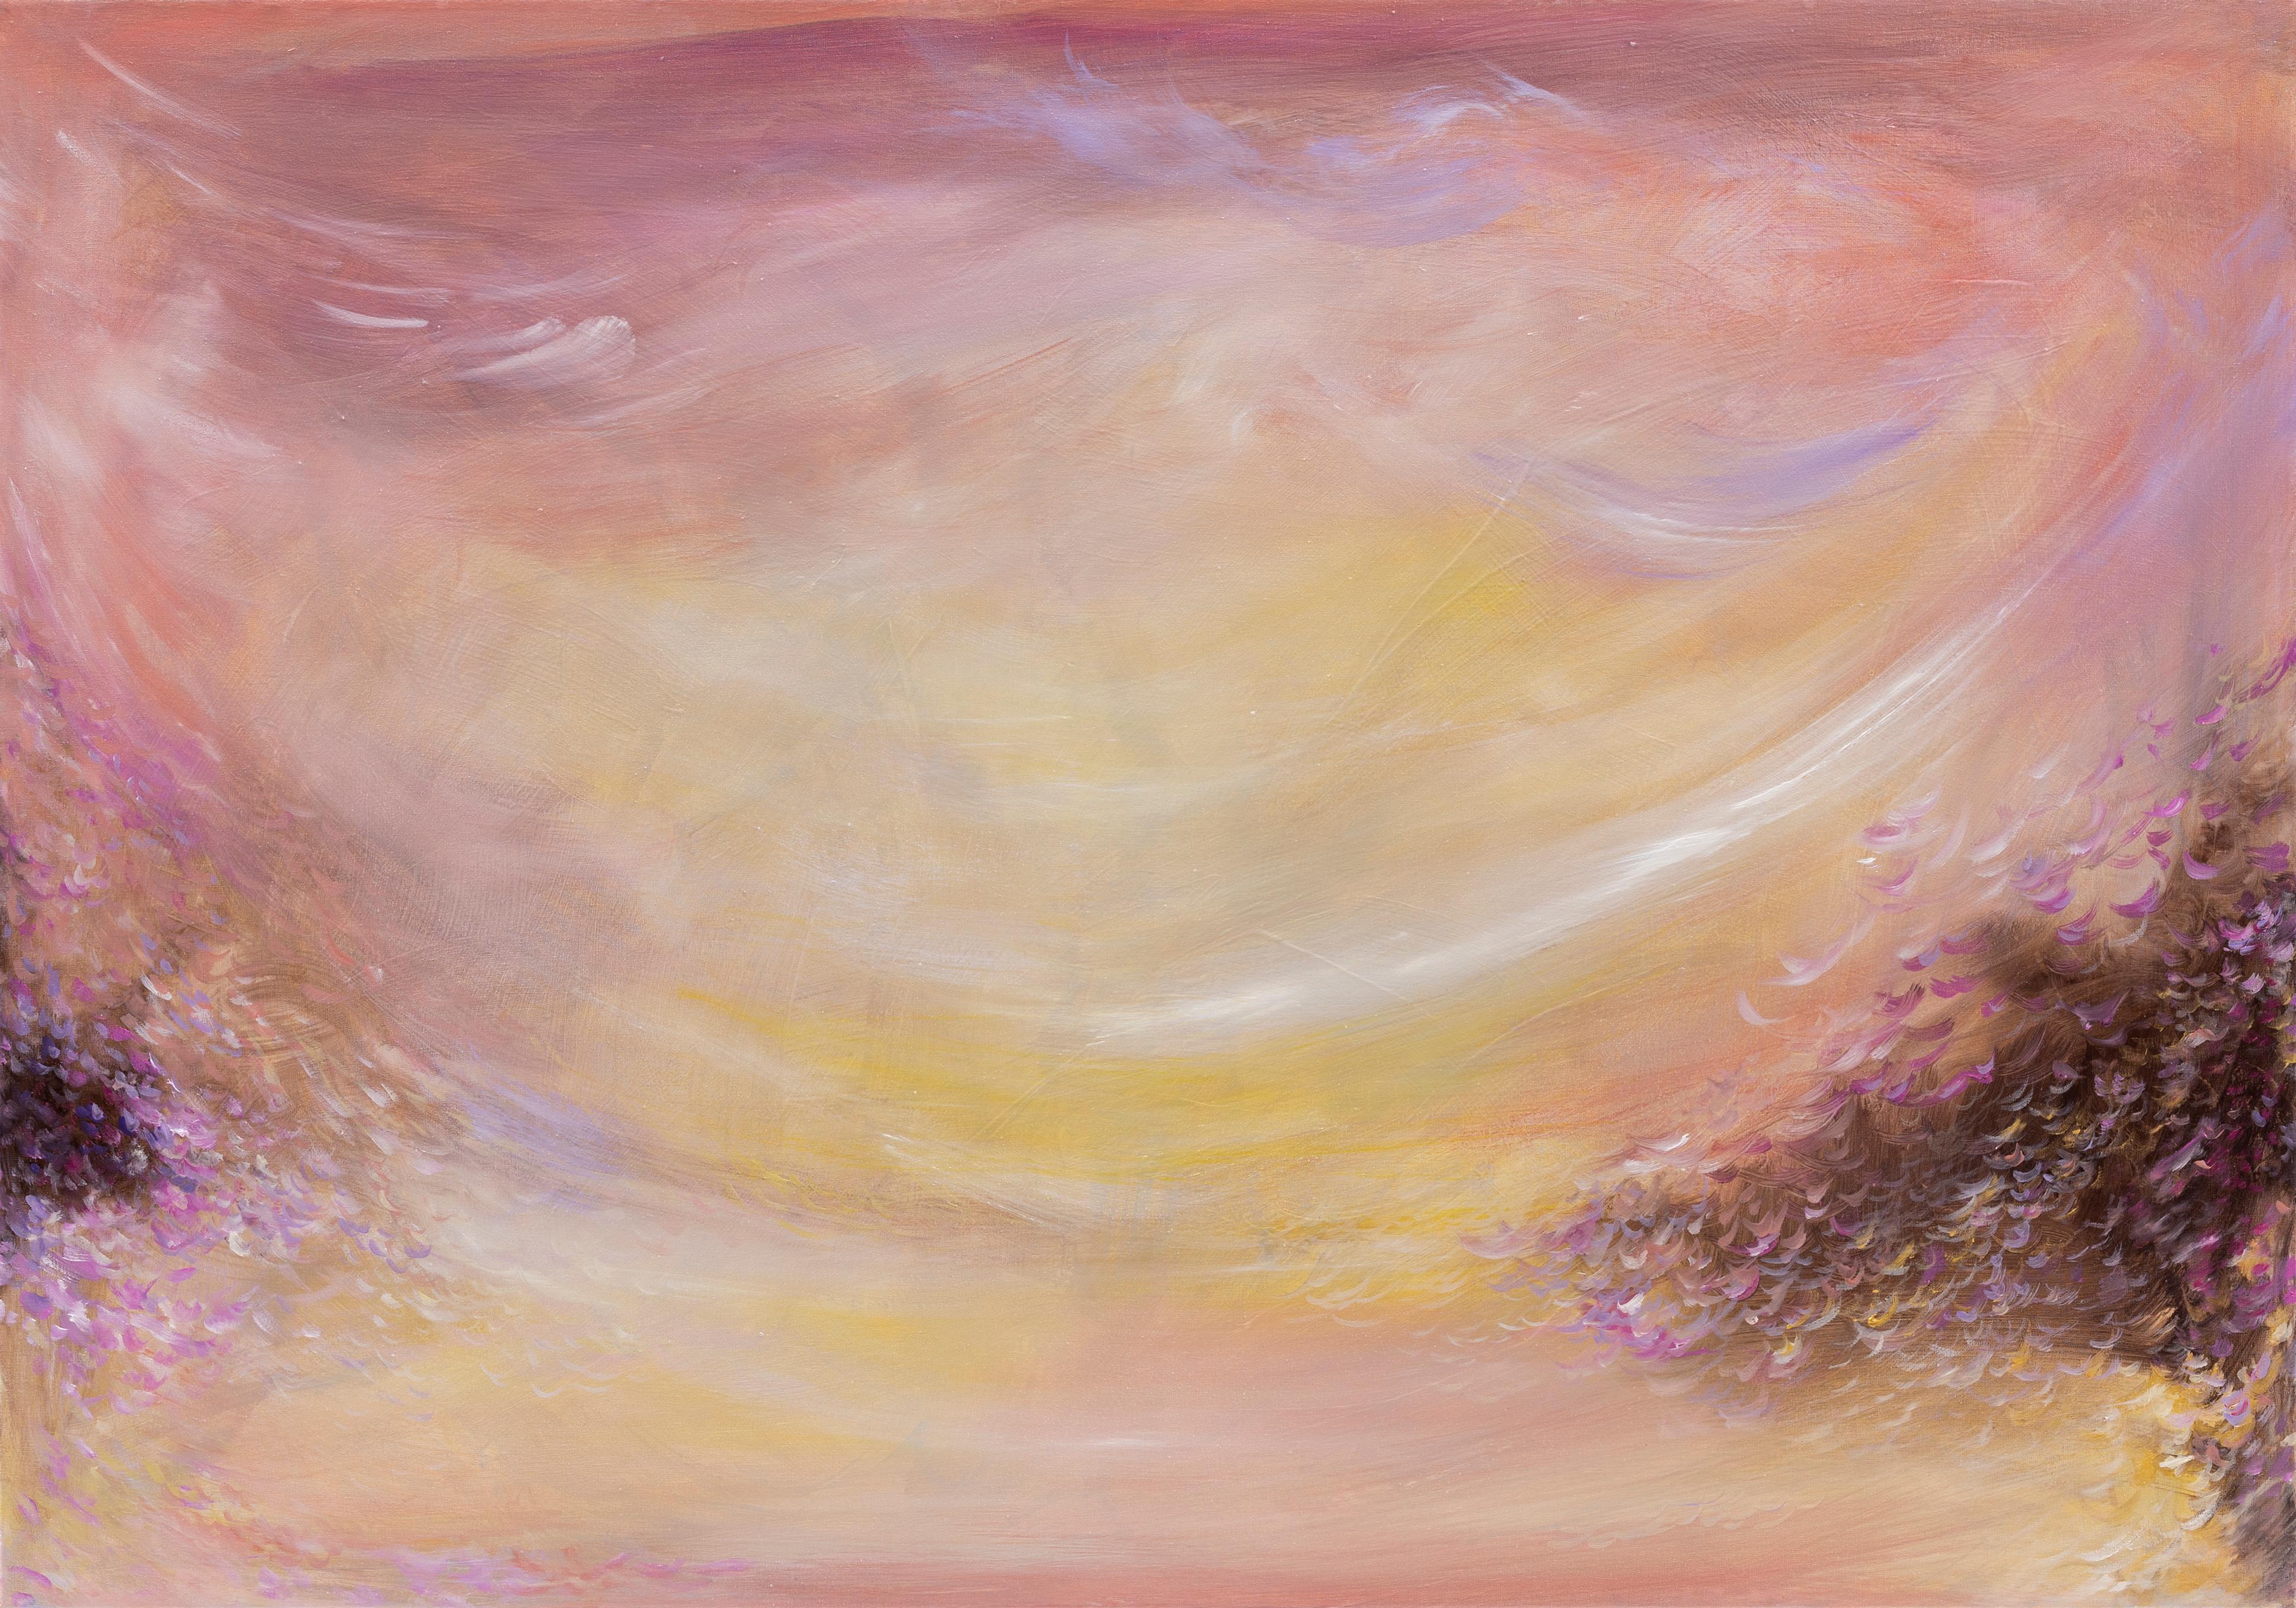 Ballad of the wind - Abstract impressionist warm sunset painting